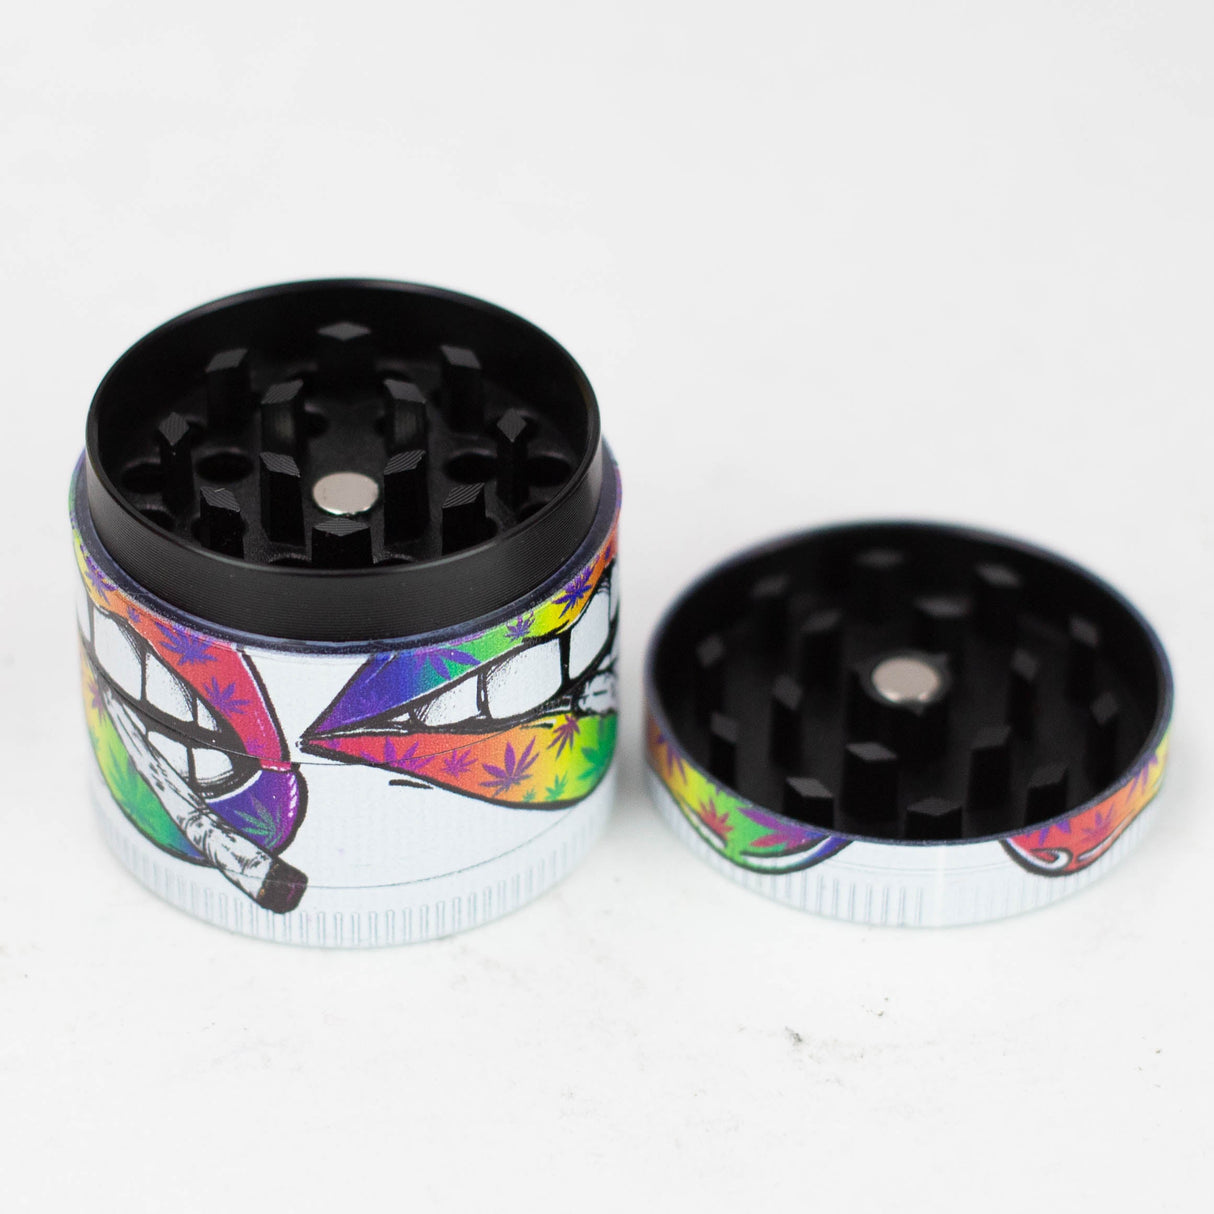 1.5" Metal Grinder Red Lips Design 4 Layers Box of 12 [GZ632]